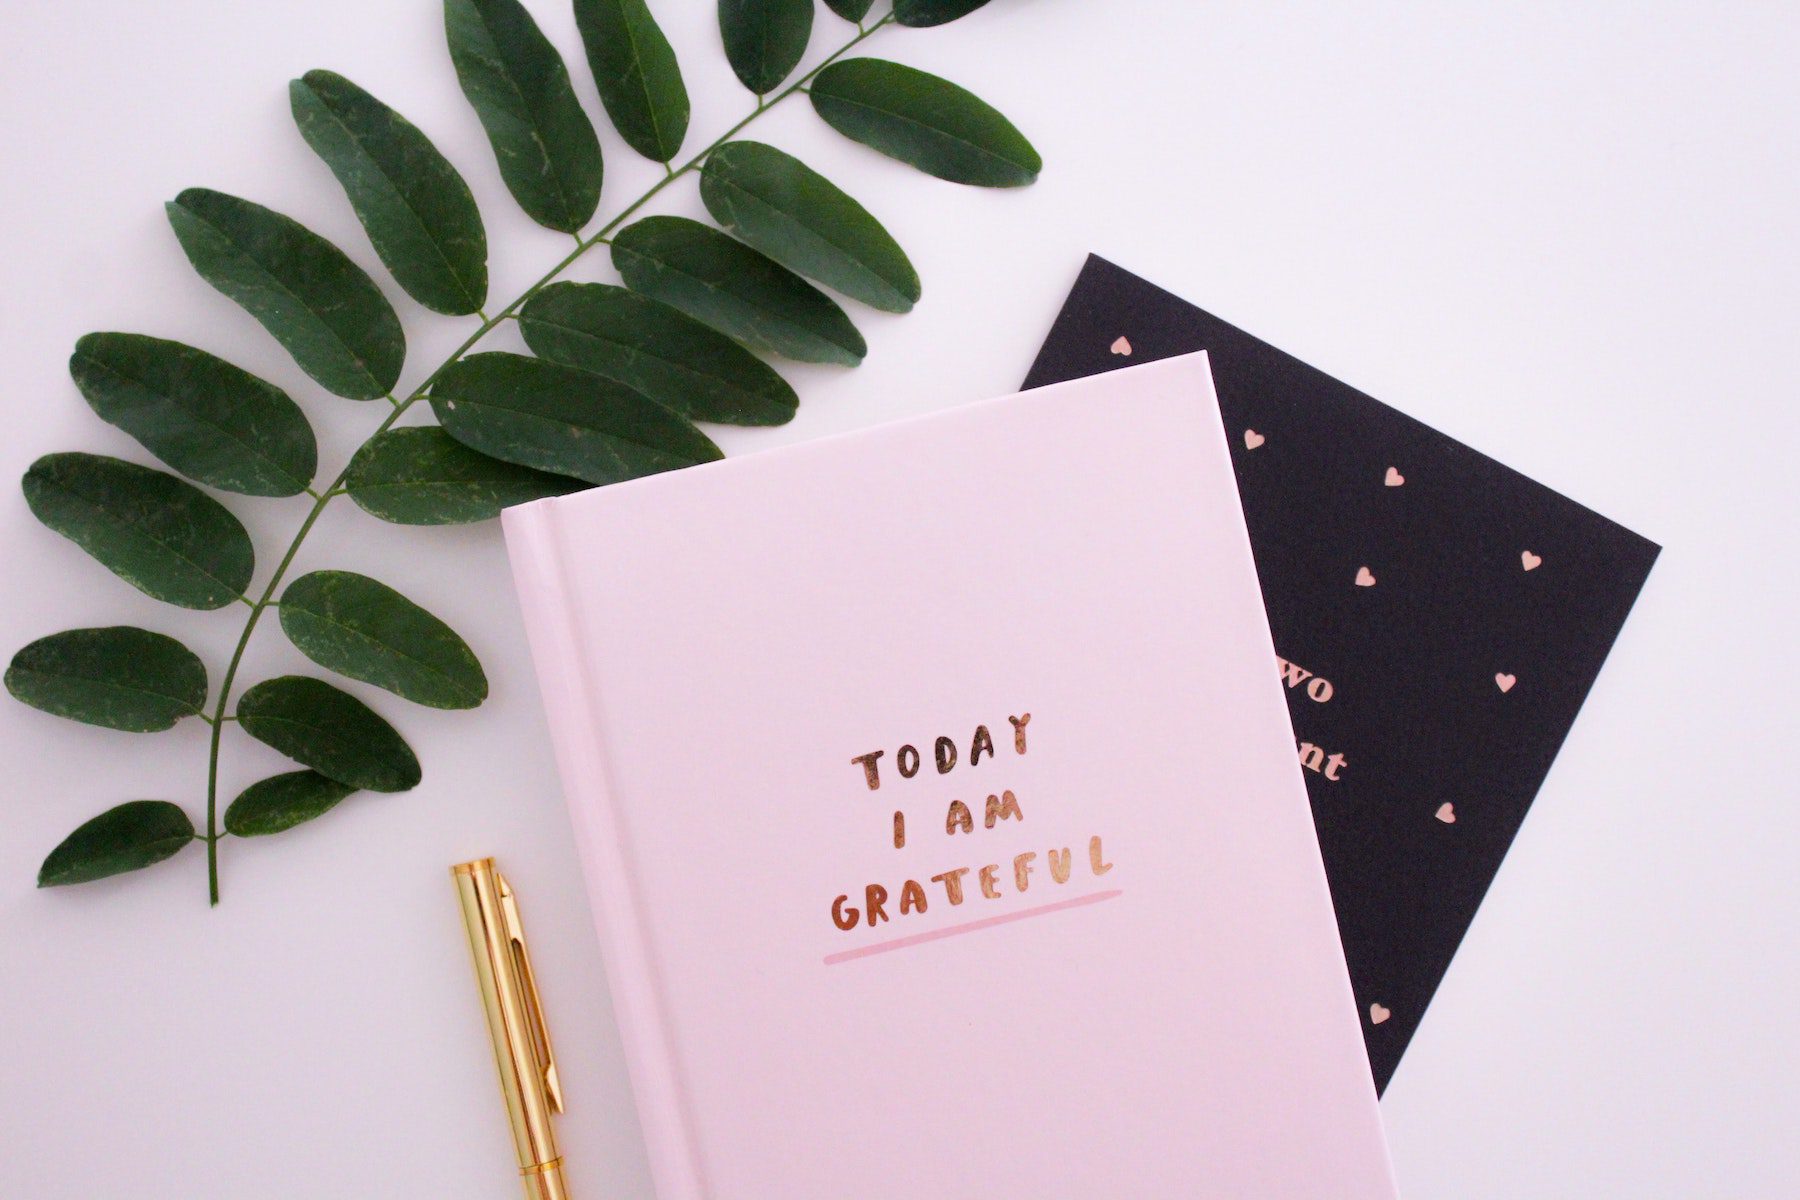 A pink gratitude journal stacked on another journal, flatlay with office supplies and greenery.